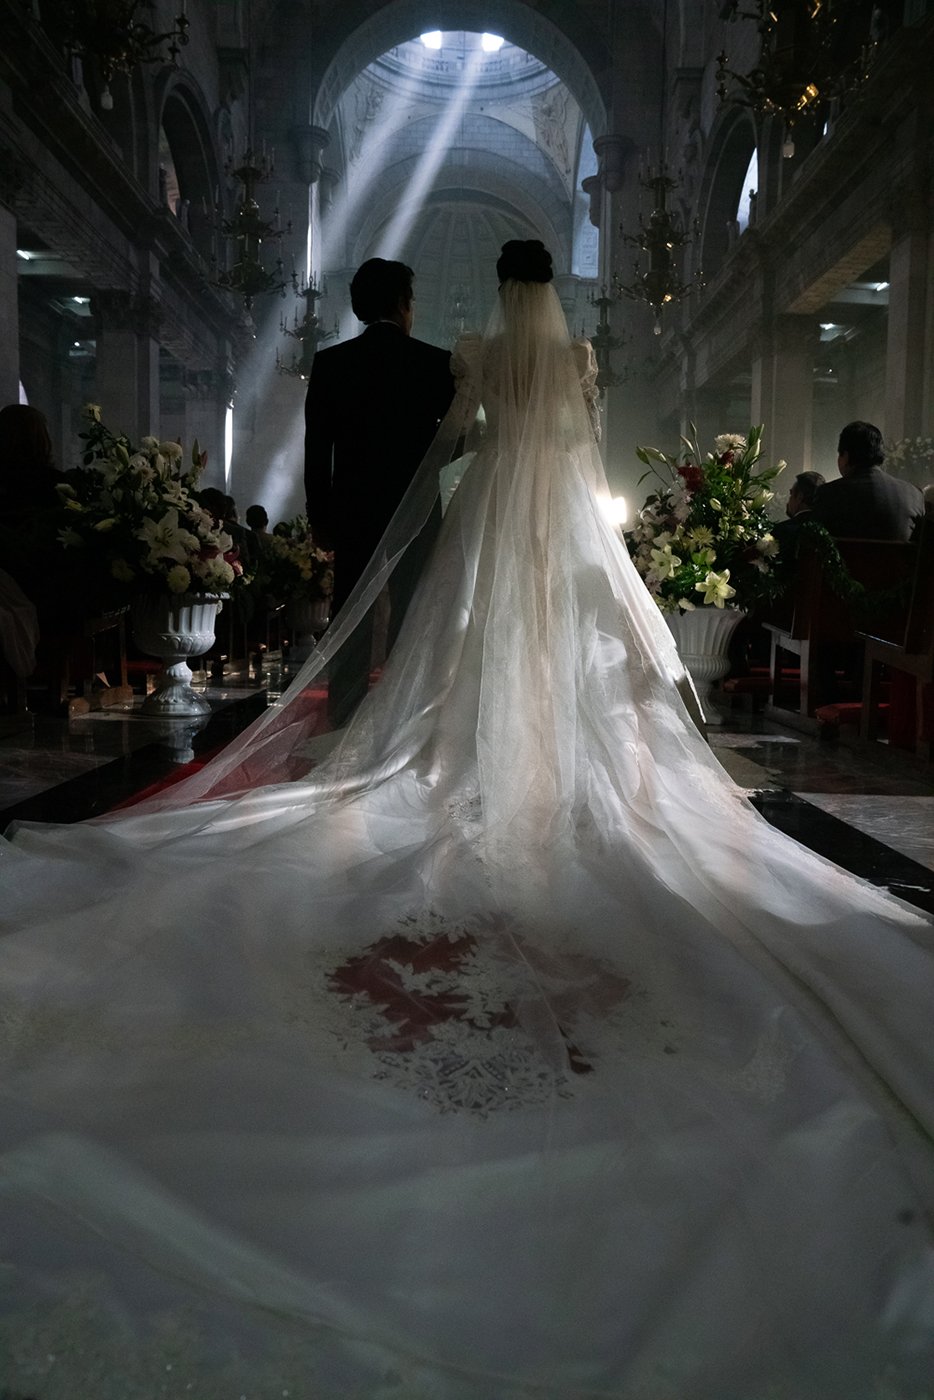 Couple walks down the aisle in Narcos: Mexico season 3 shot by Nicole Franco for Netflix